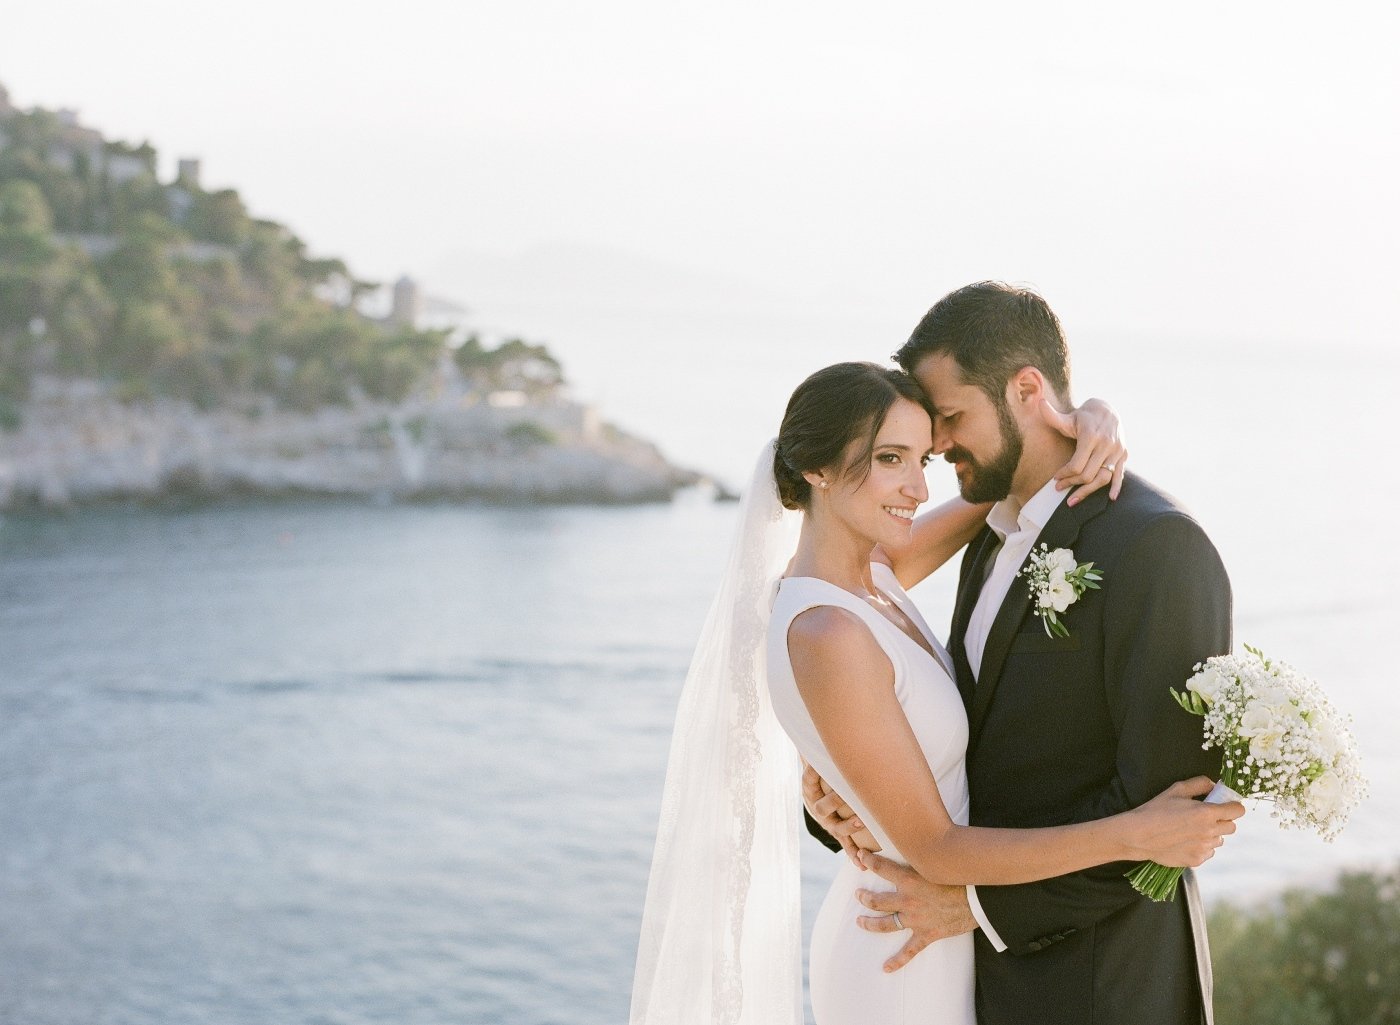 how to have an intimate and meaningful wedding - destination wedding in Hydra, Greece